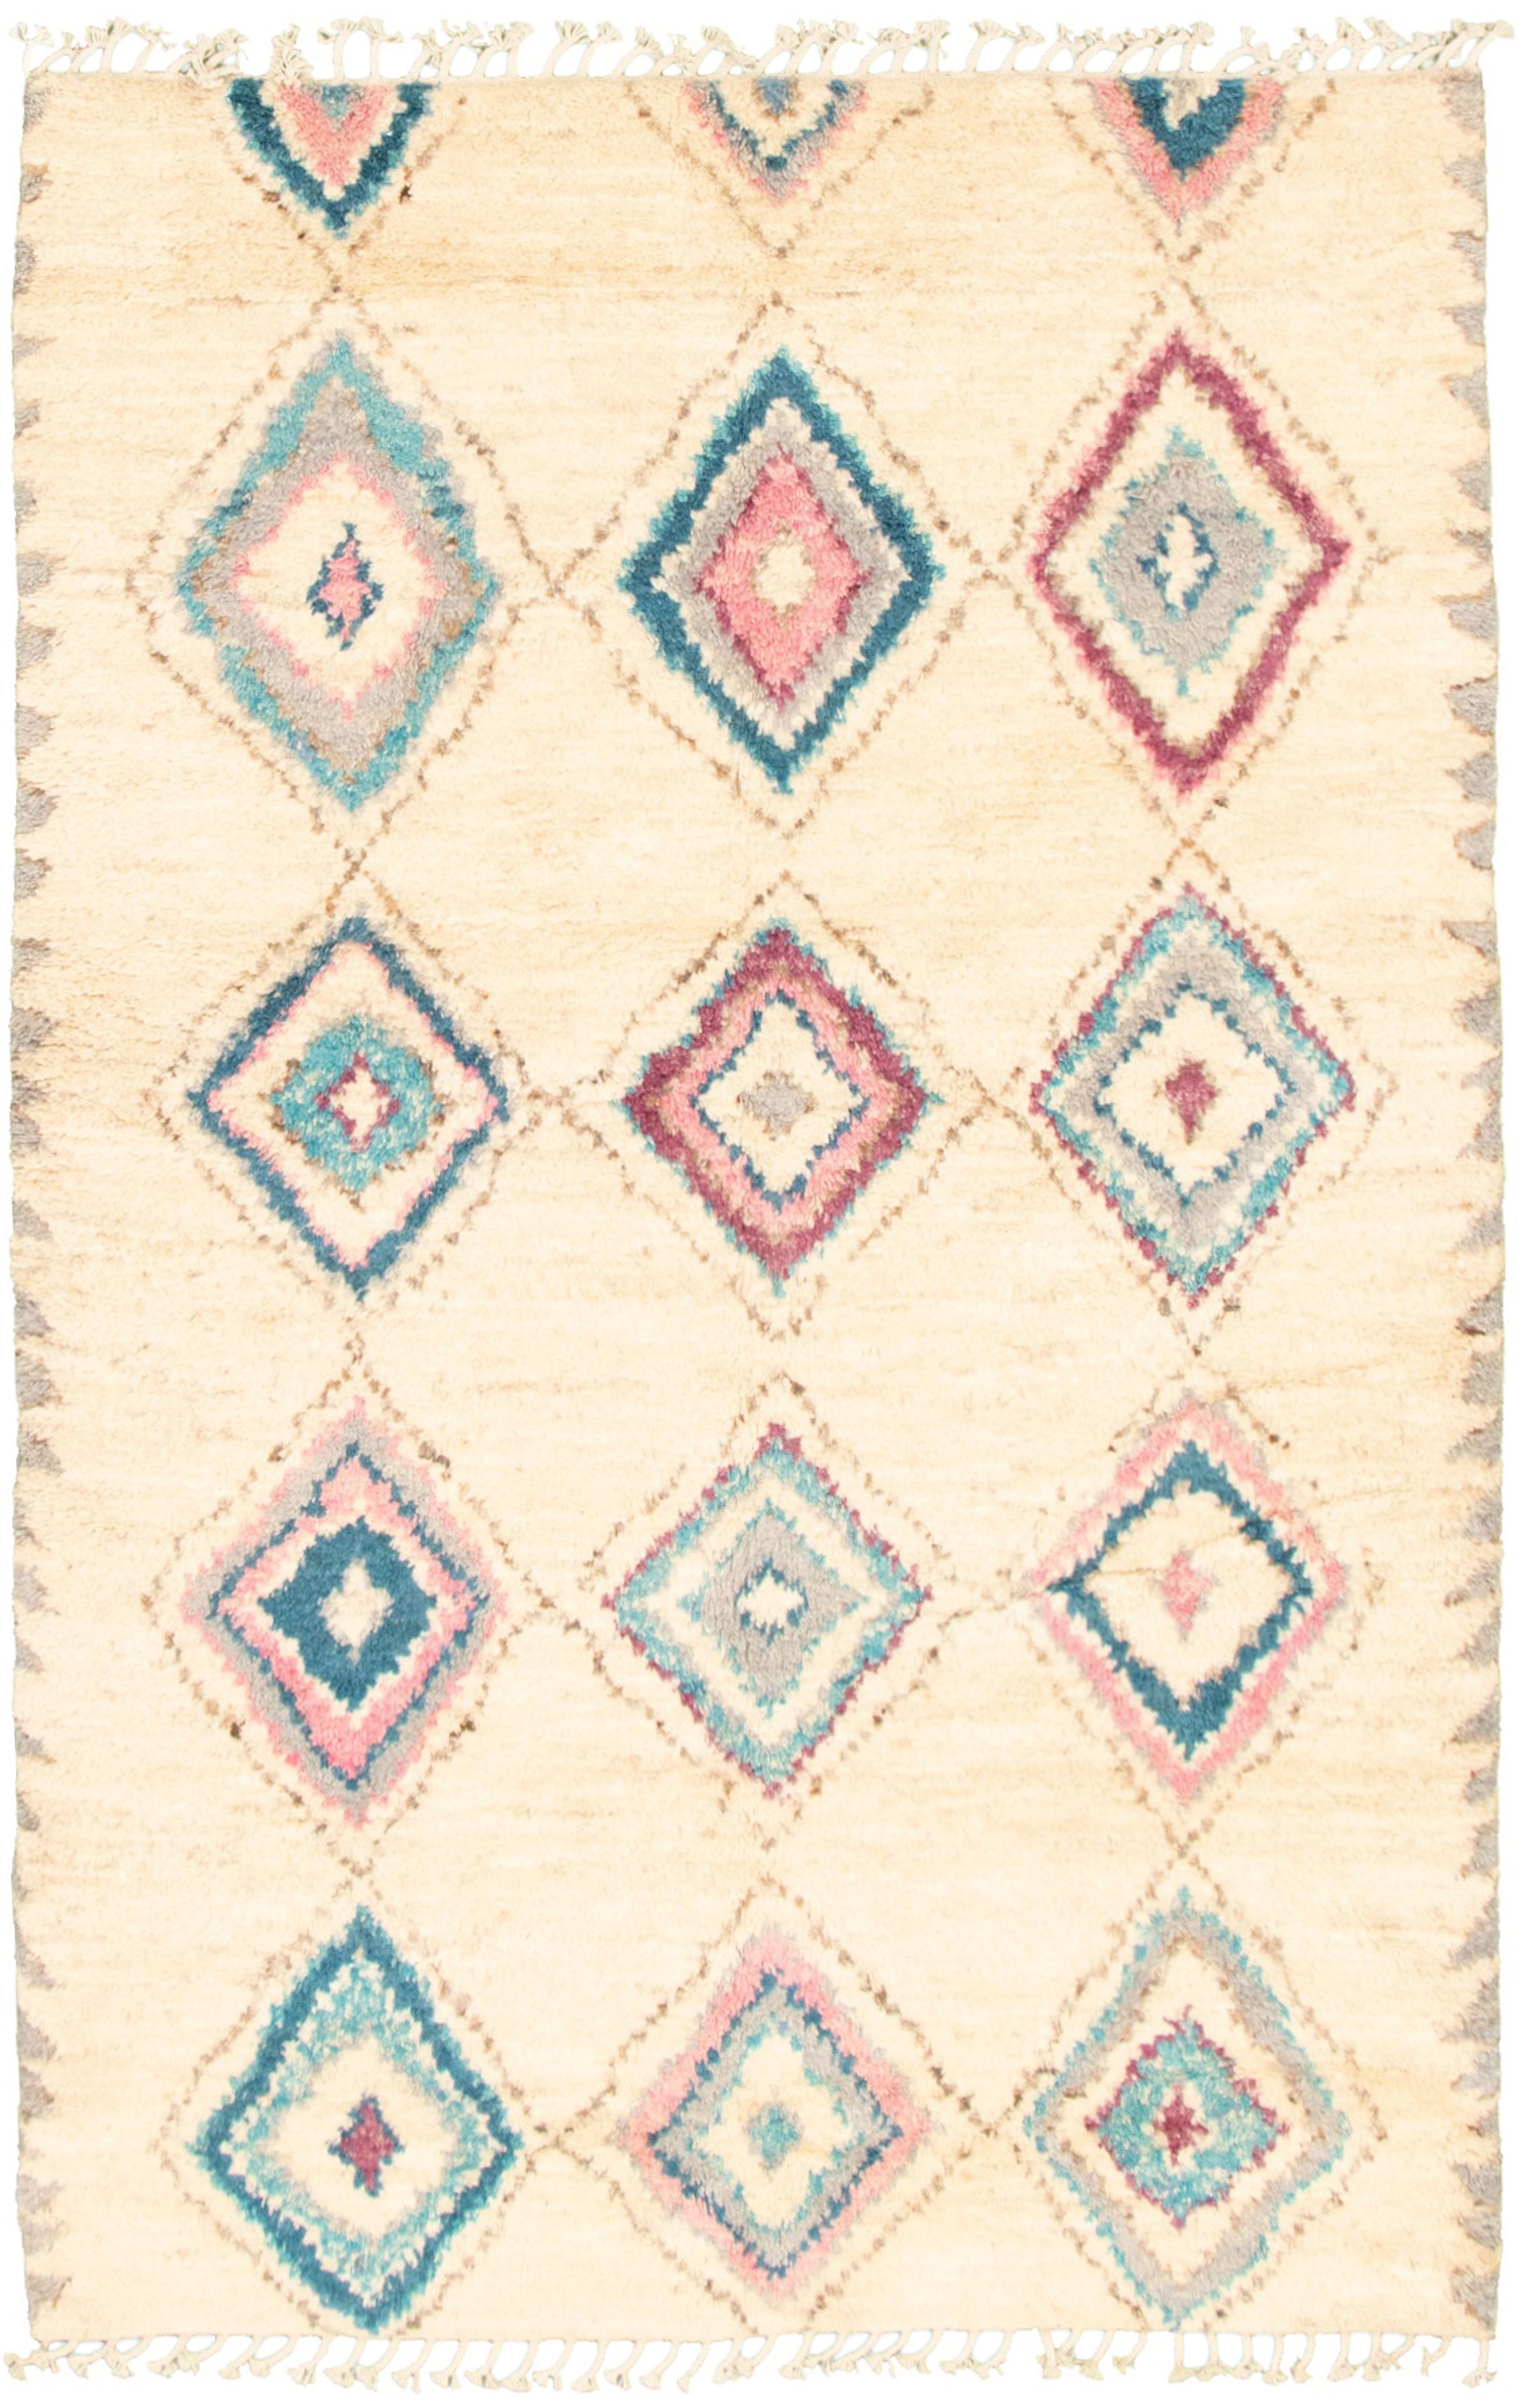 Hand-knotted Marrakech Ivory  Rug 5'5" x 8'2"  Size: 5'5" x 8'2"  